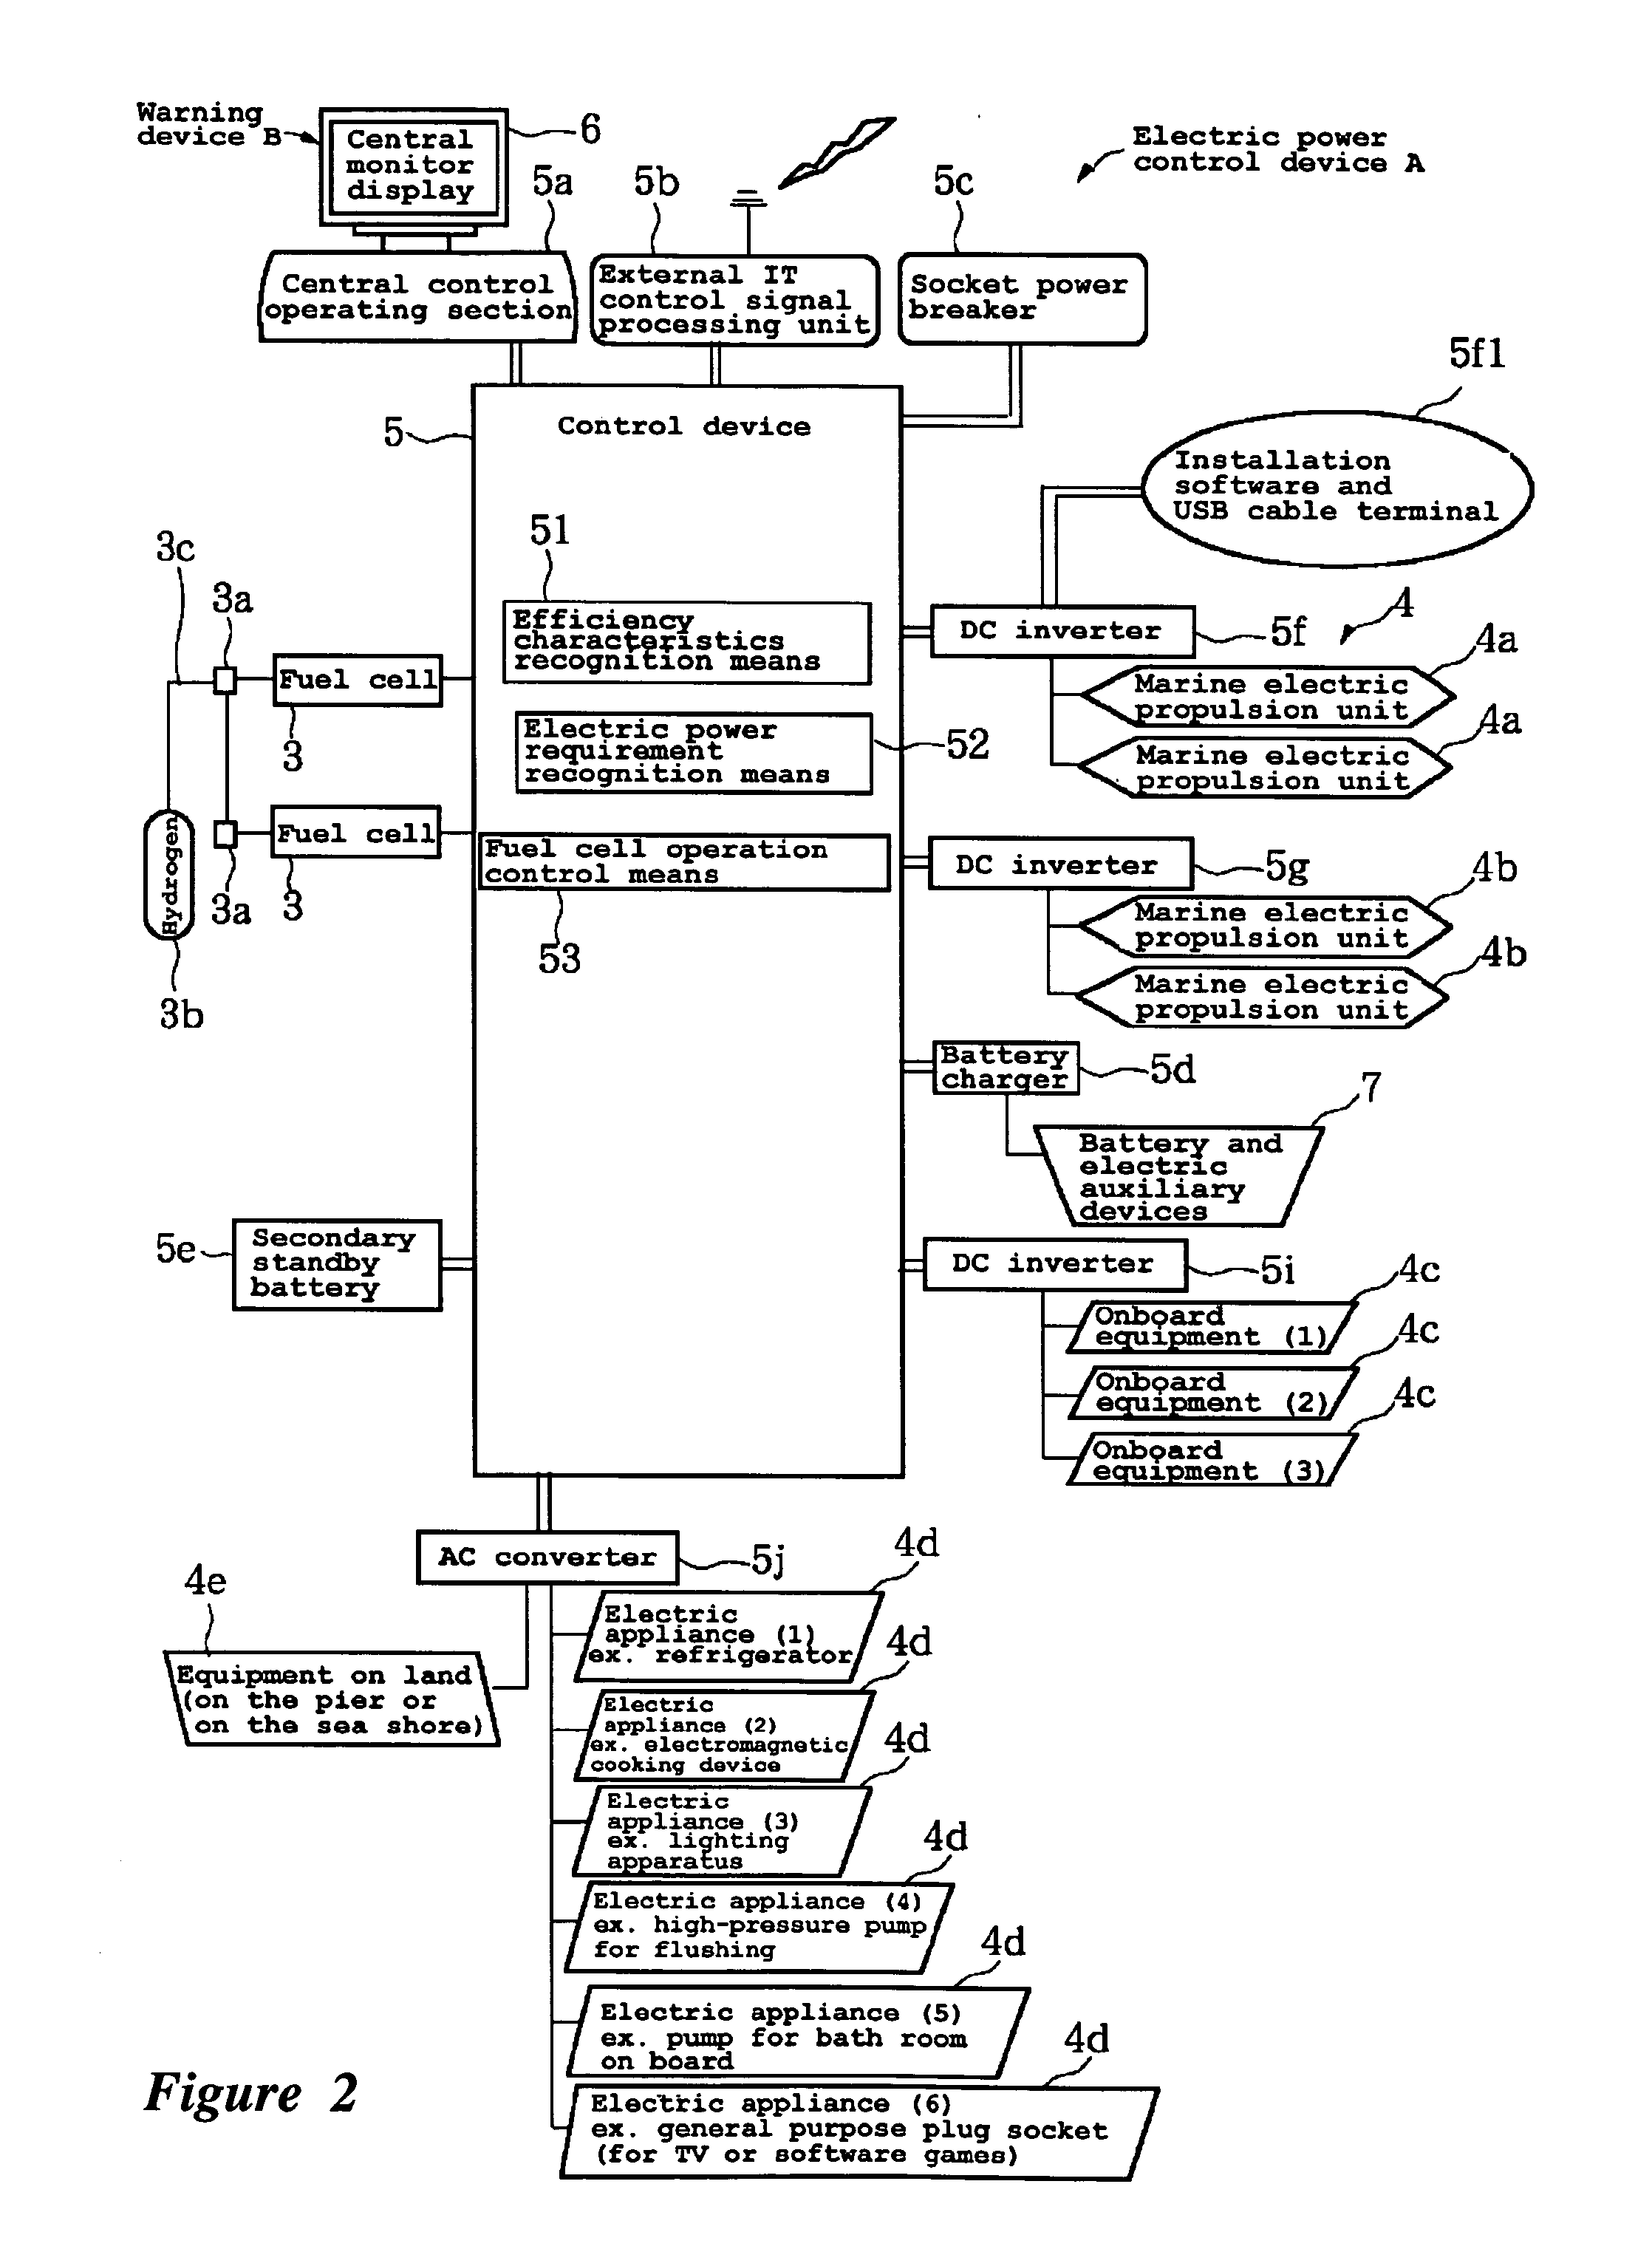 Electric power control device for watercraft